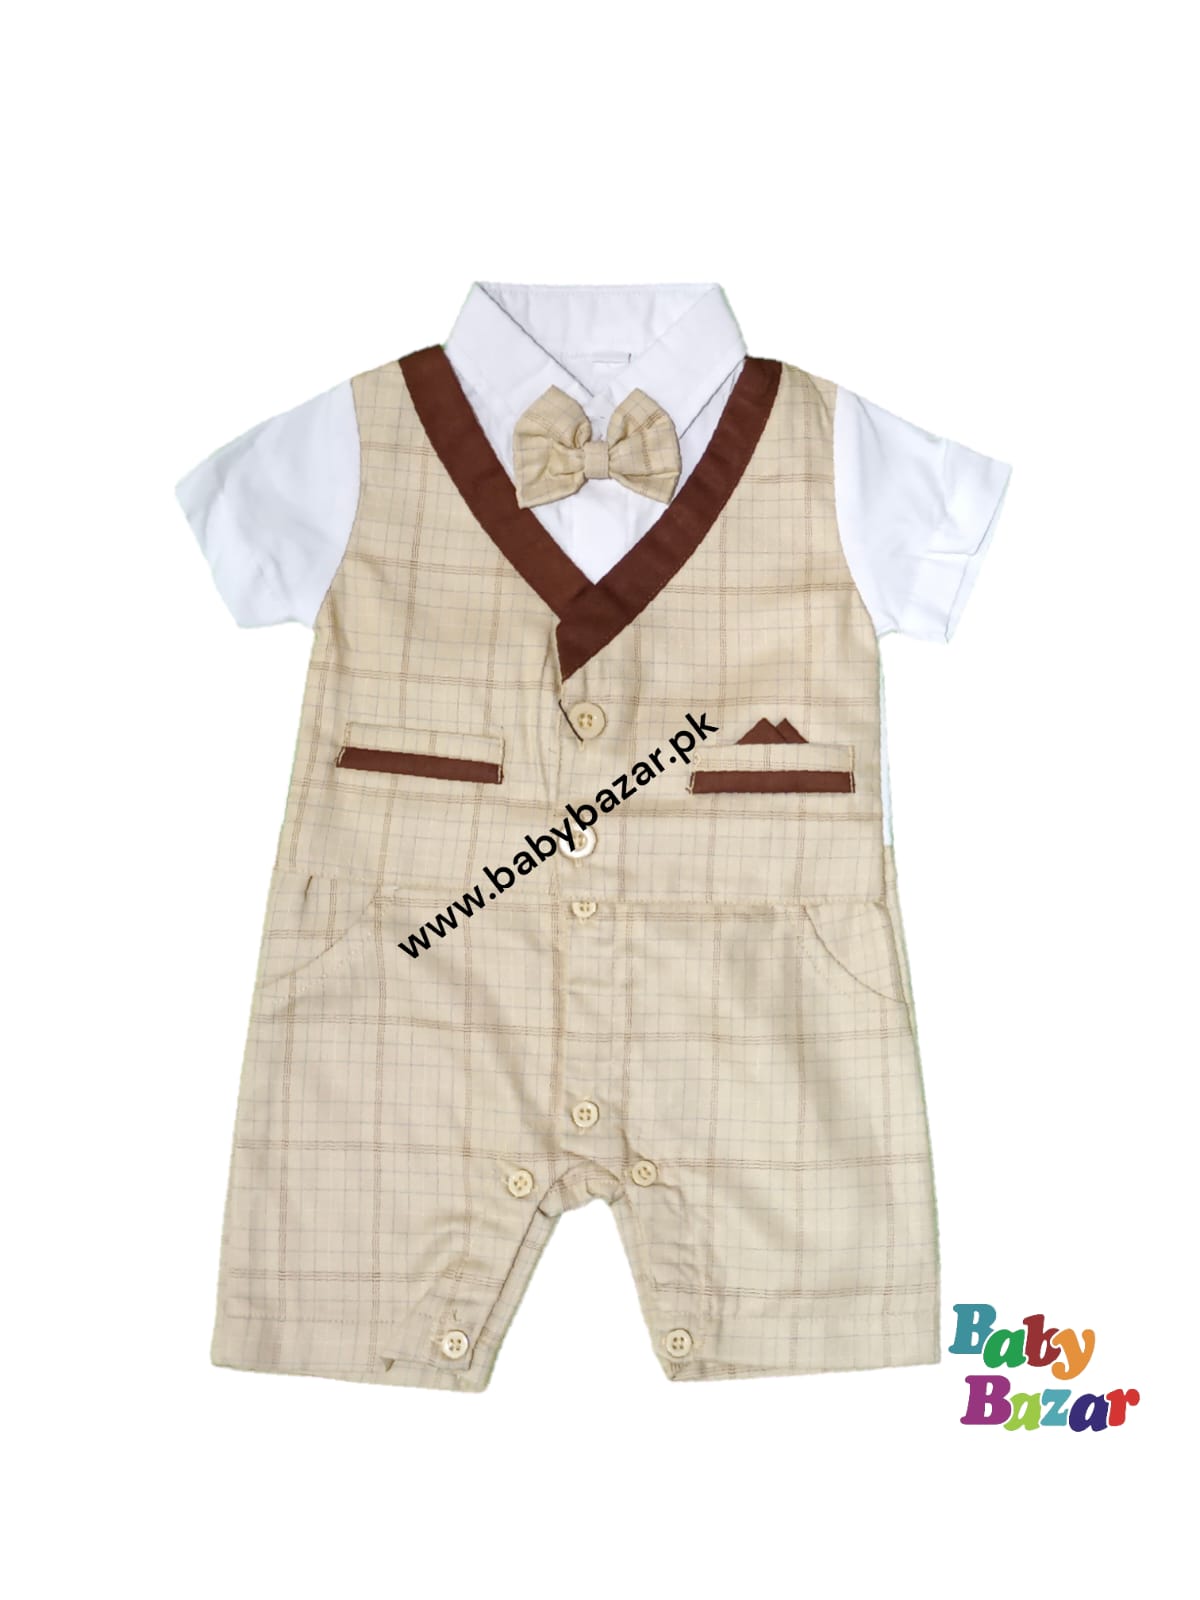 Summer Stylish Romper with Bow Tie for Kids